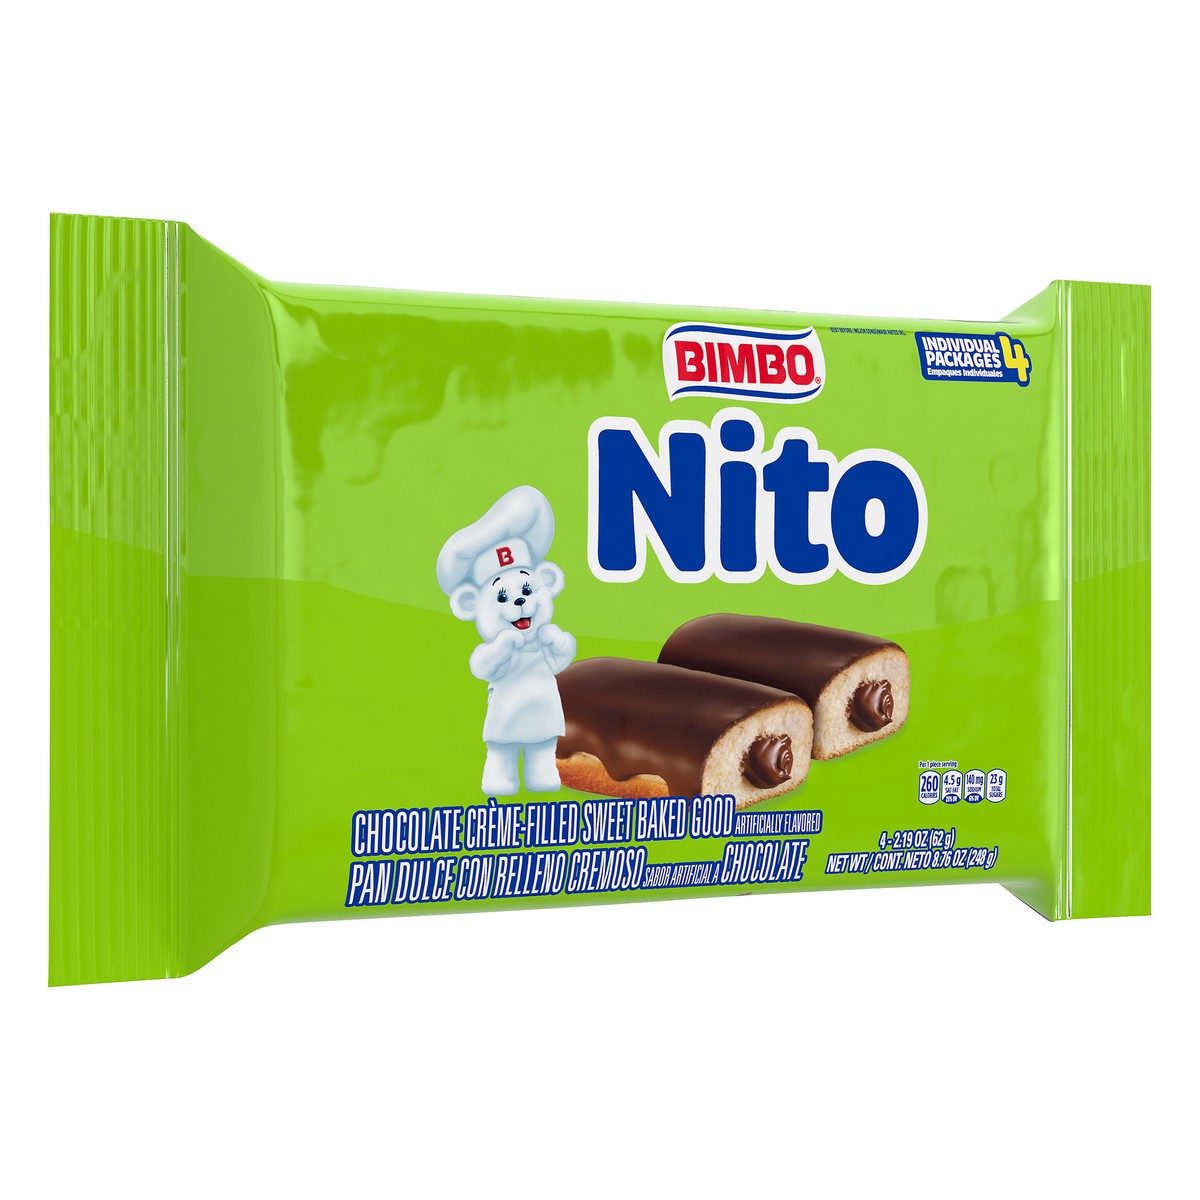 slide 12 of 14, Bimbo Nito Chocolate Crème Filled Sweet Baked Good, 4 packs, Soft Eclairs, 8.76 oz Multipack, 8.74 oz